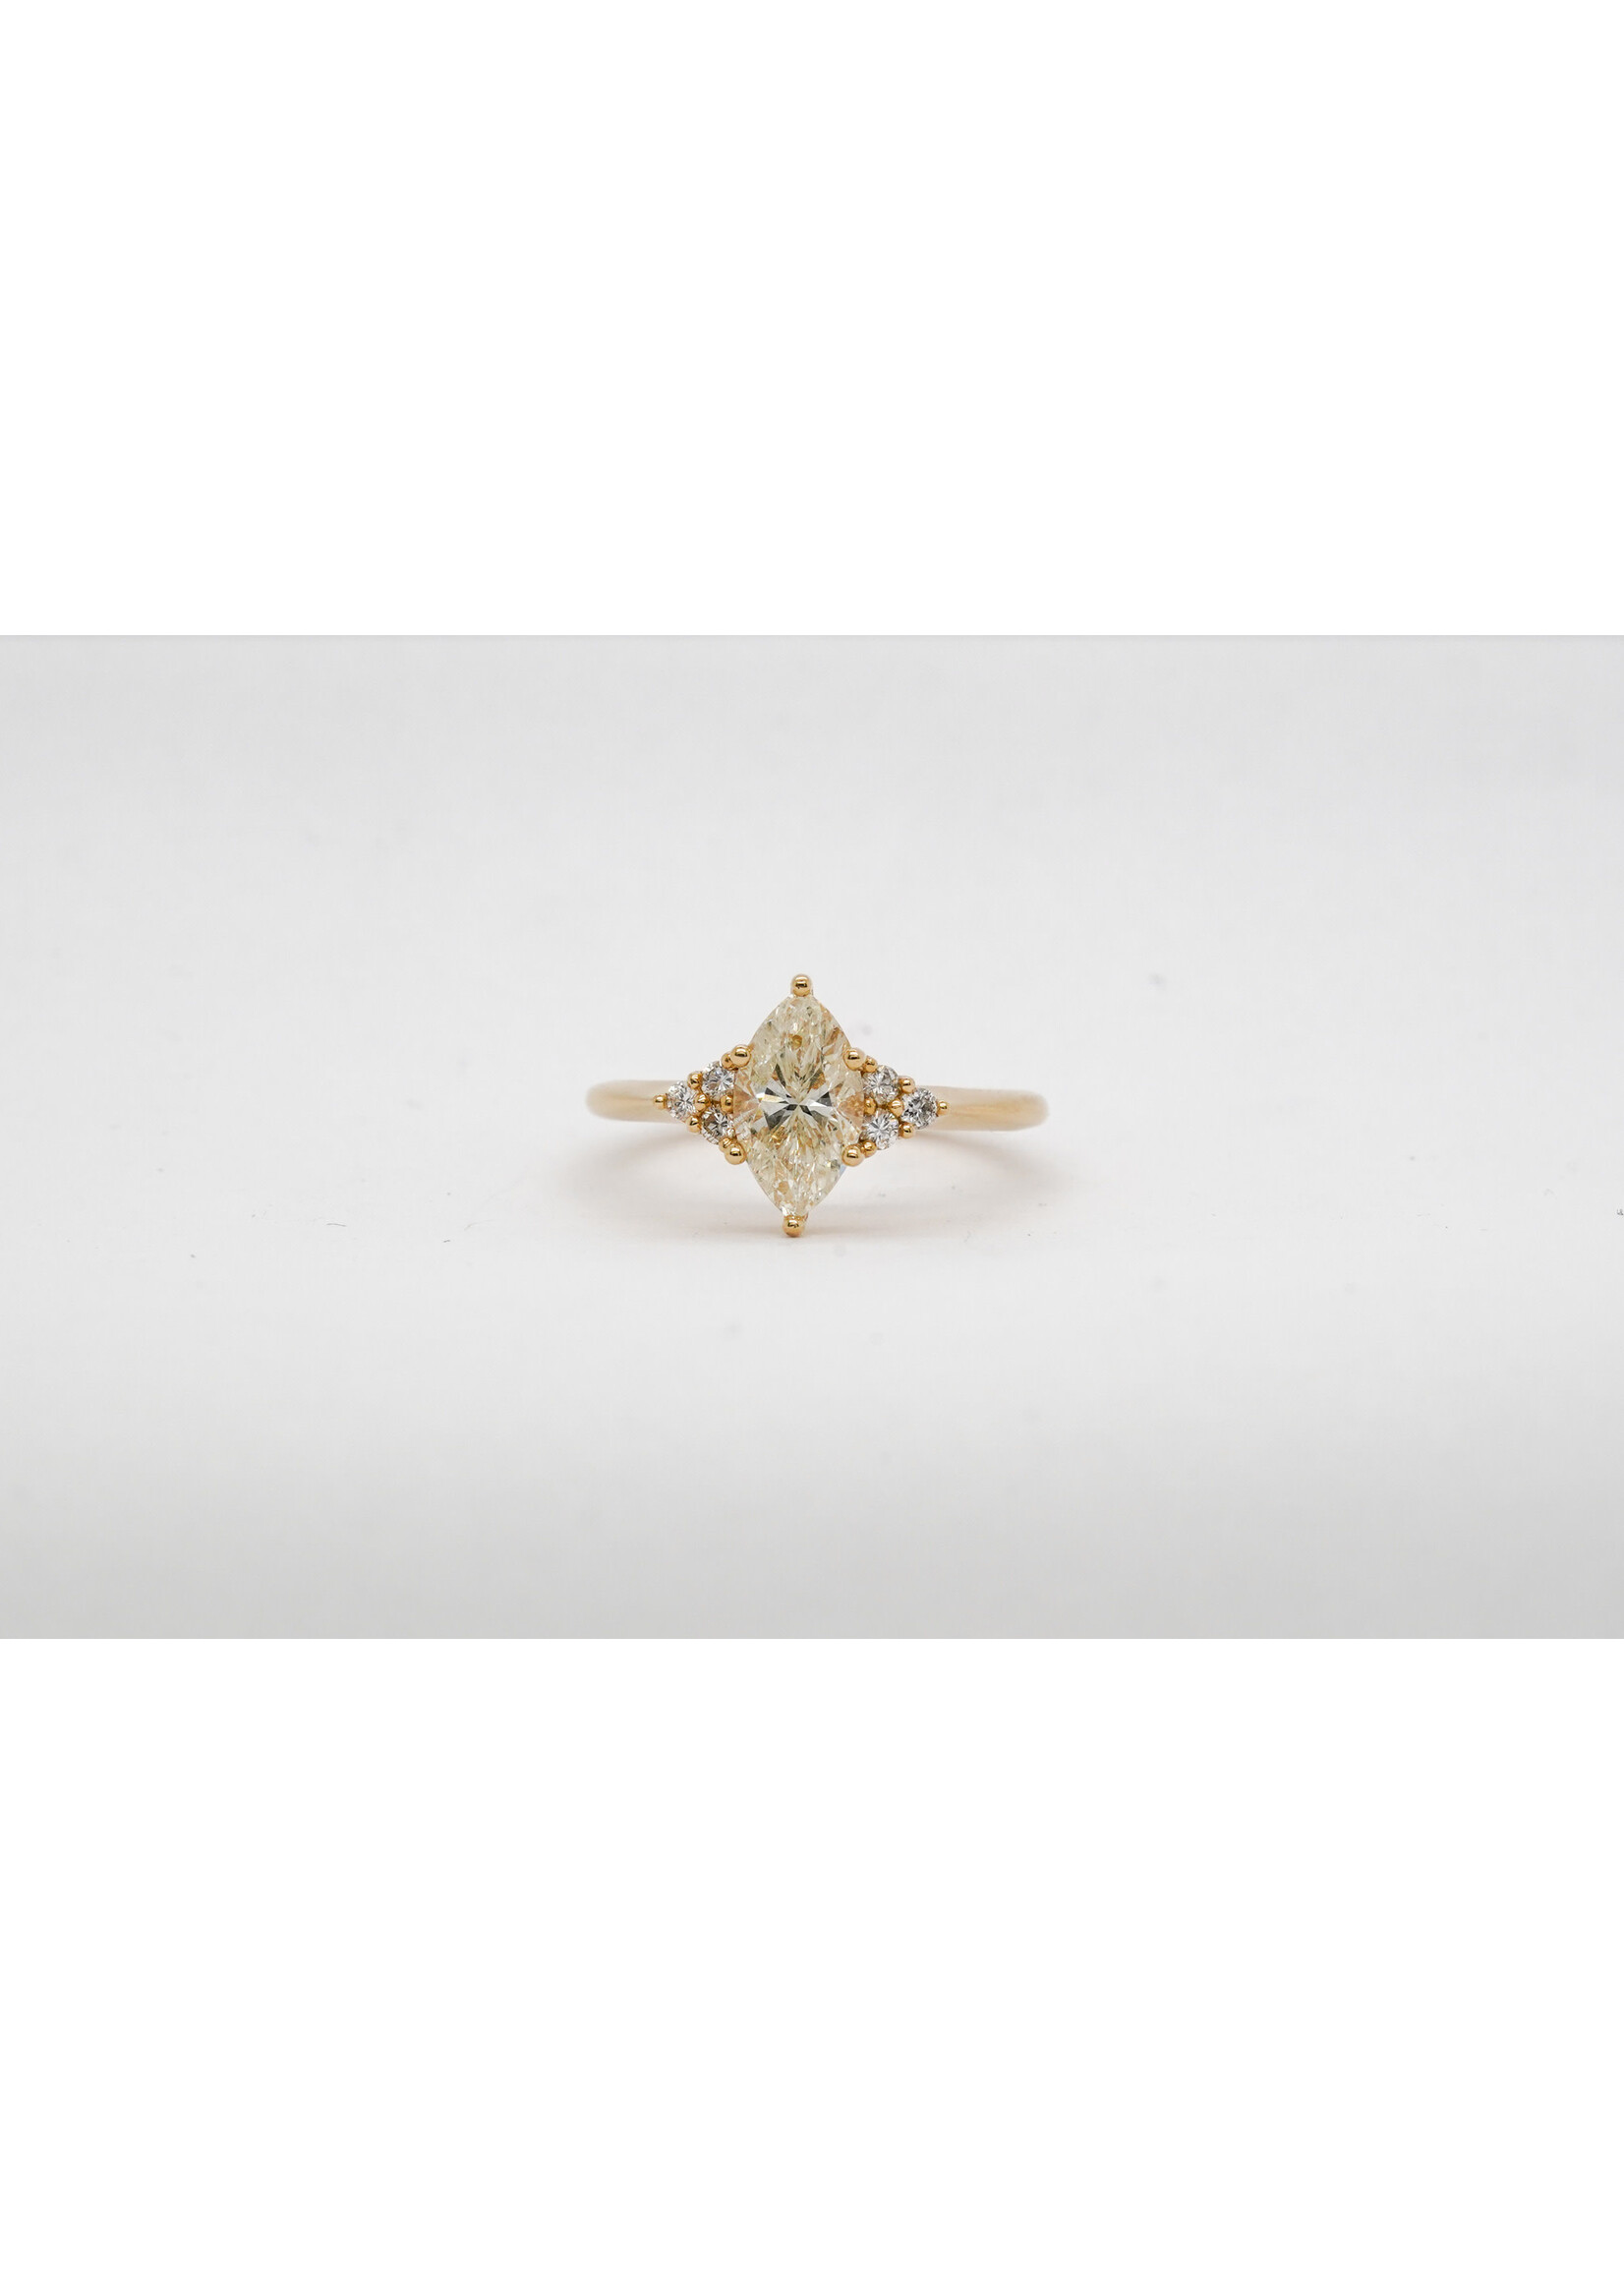 14KY 3.14g 1.66ctw (1.52ctr) J/SI2 Marquise Diamond Engagement Ring (size 6.75)